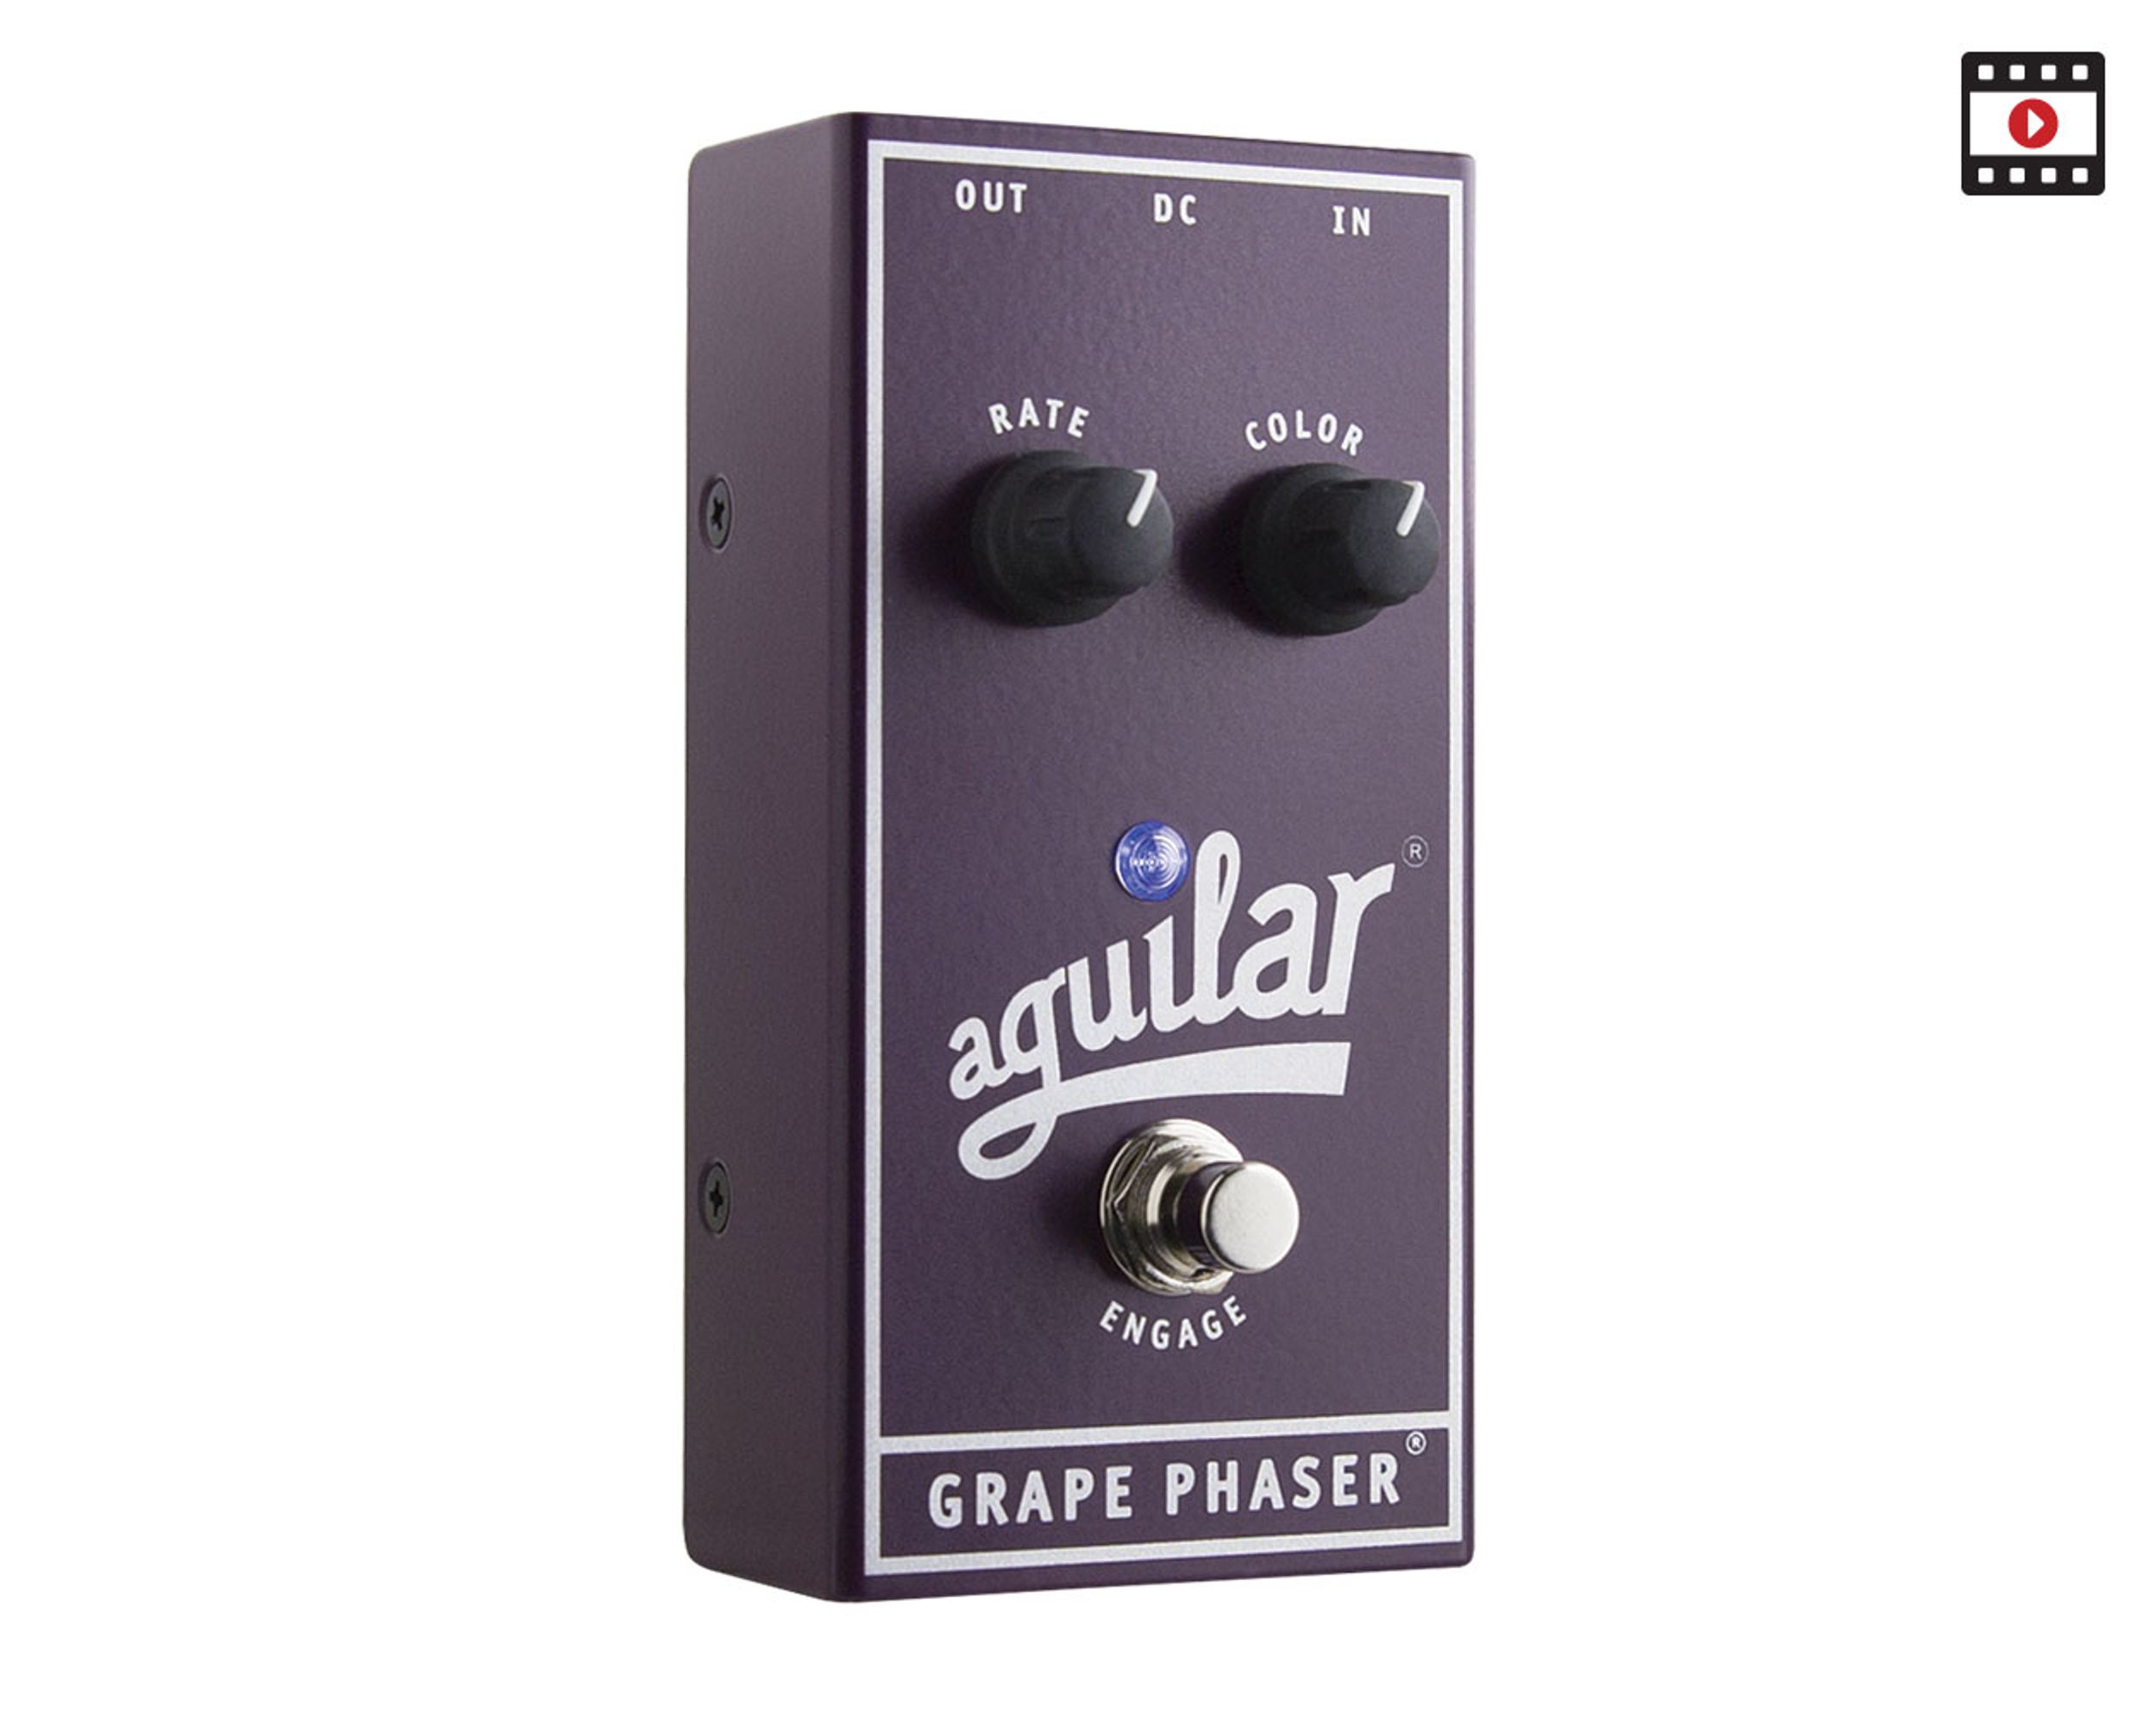 Aguilar Grape Phaser Review